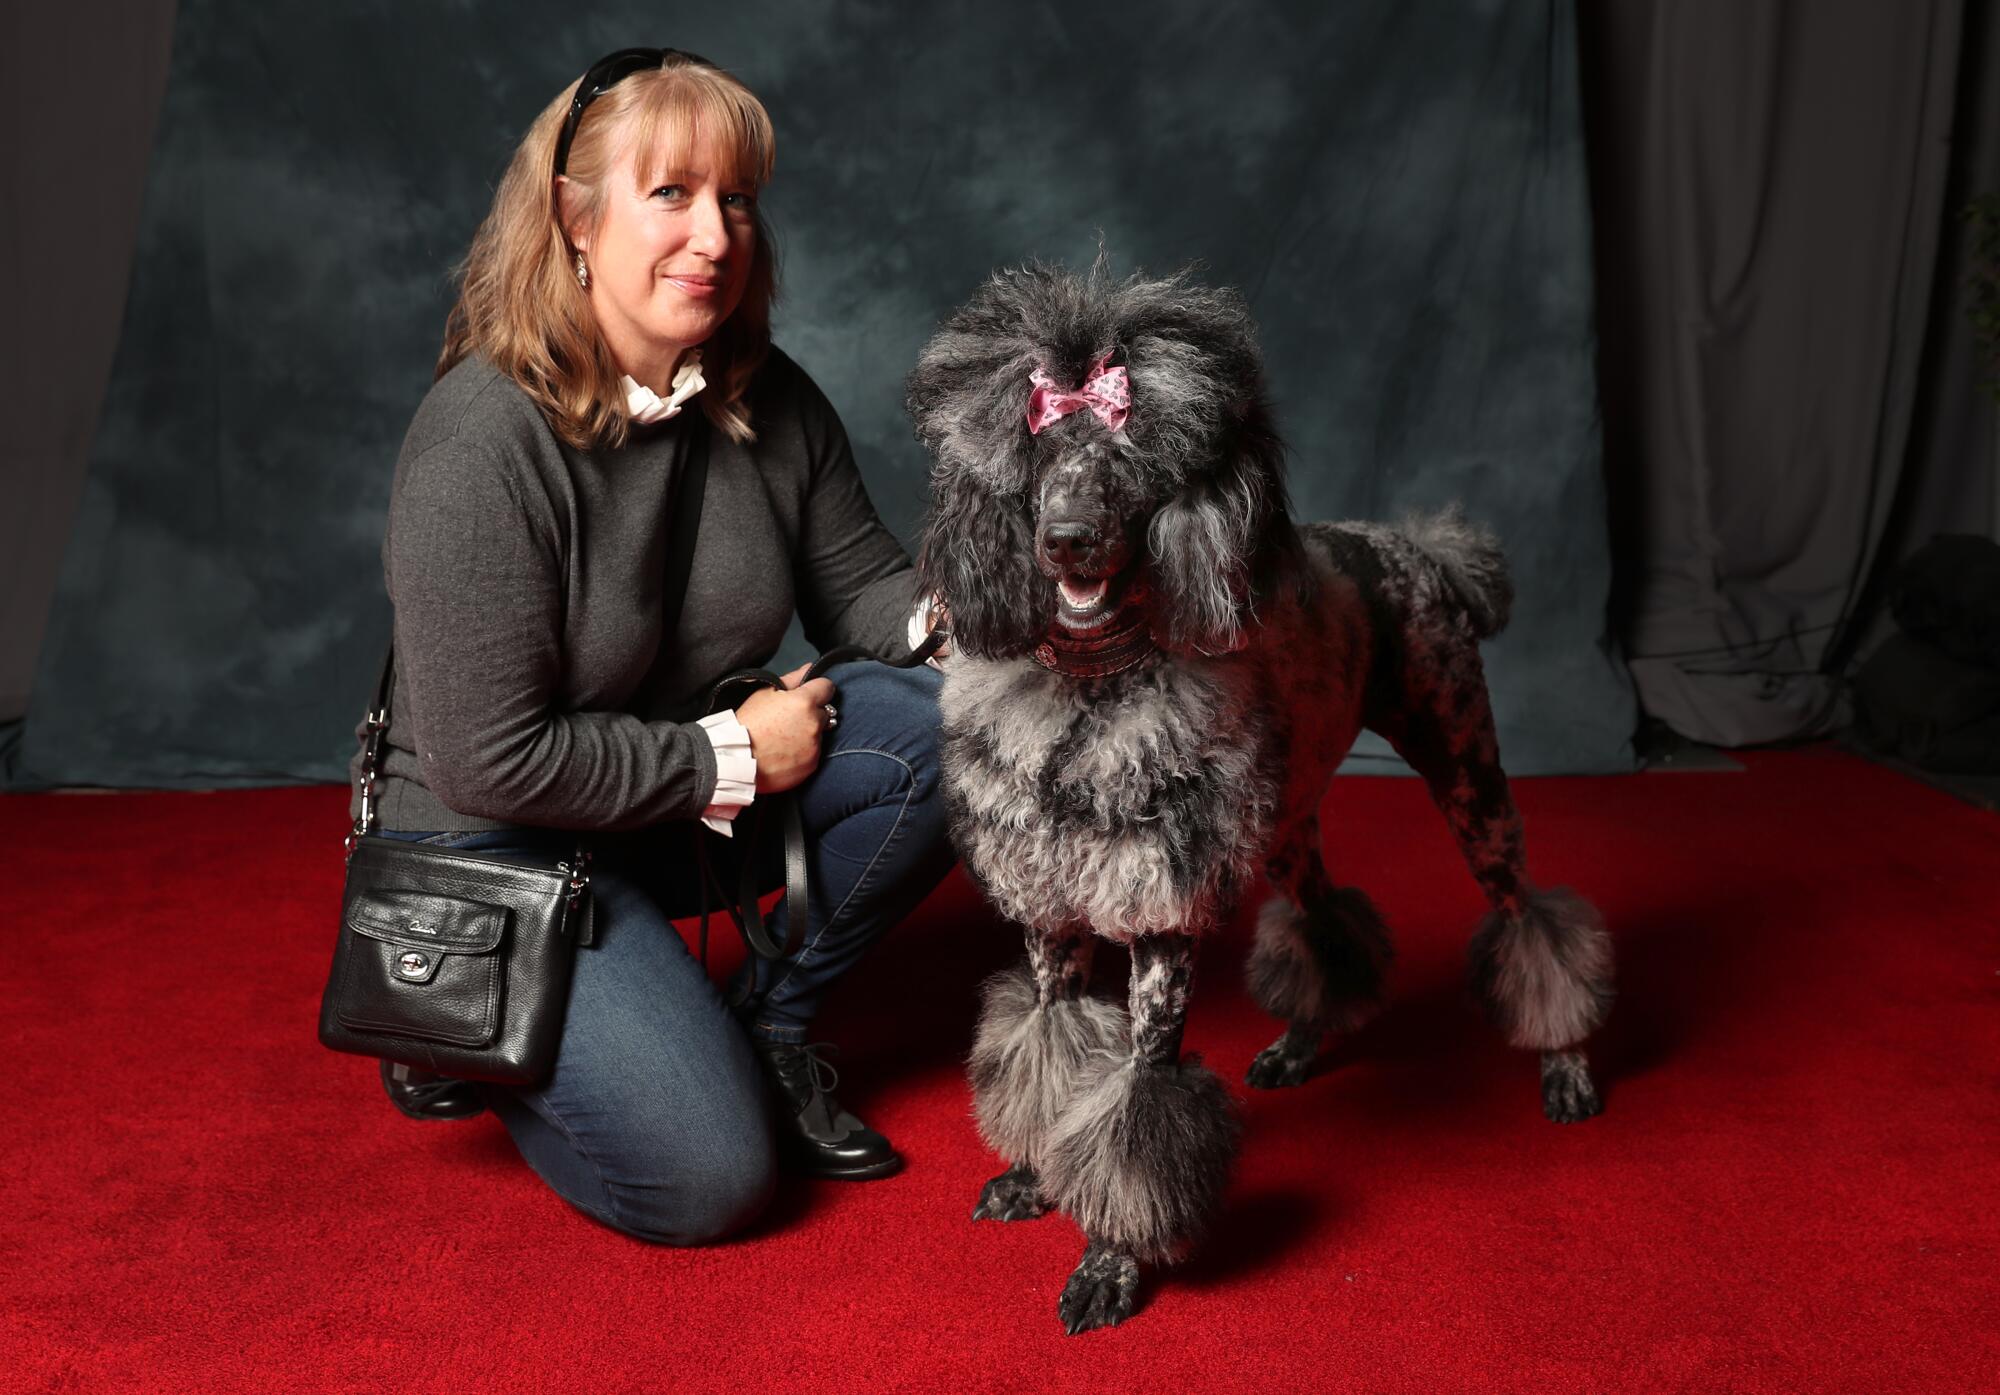 Sandra Smith of Norco poses with Cosette, a 14-month-old silver and black poodle standard.